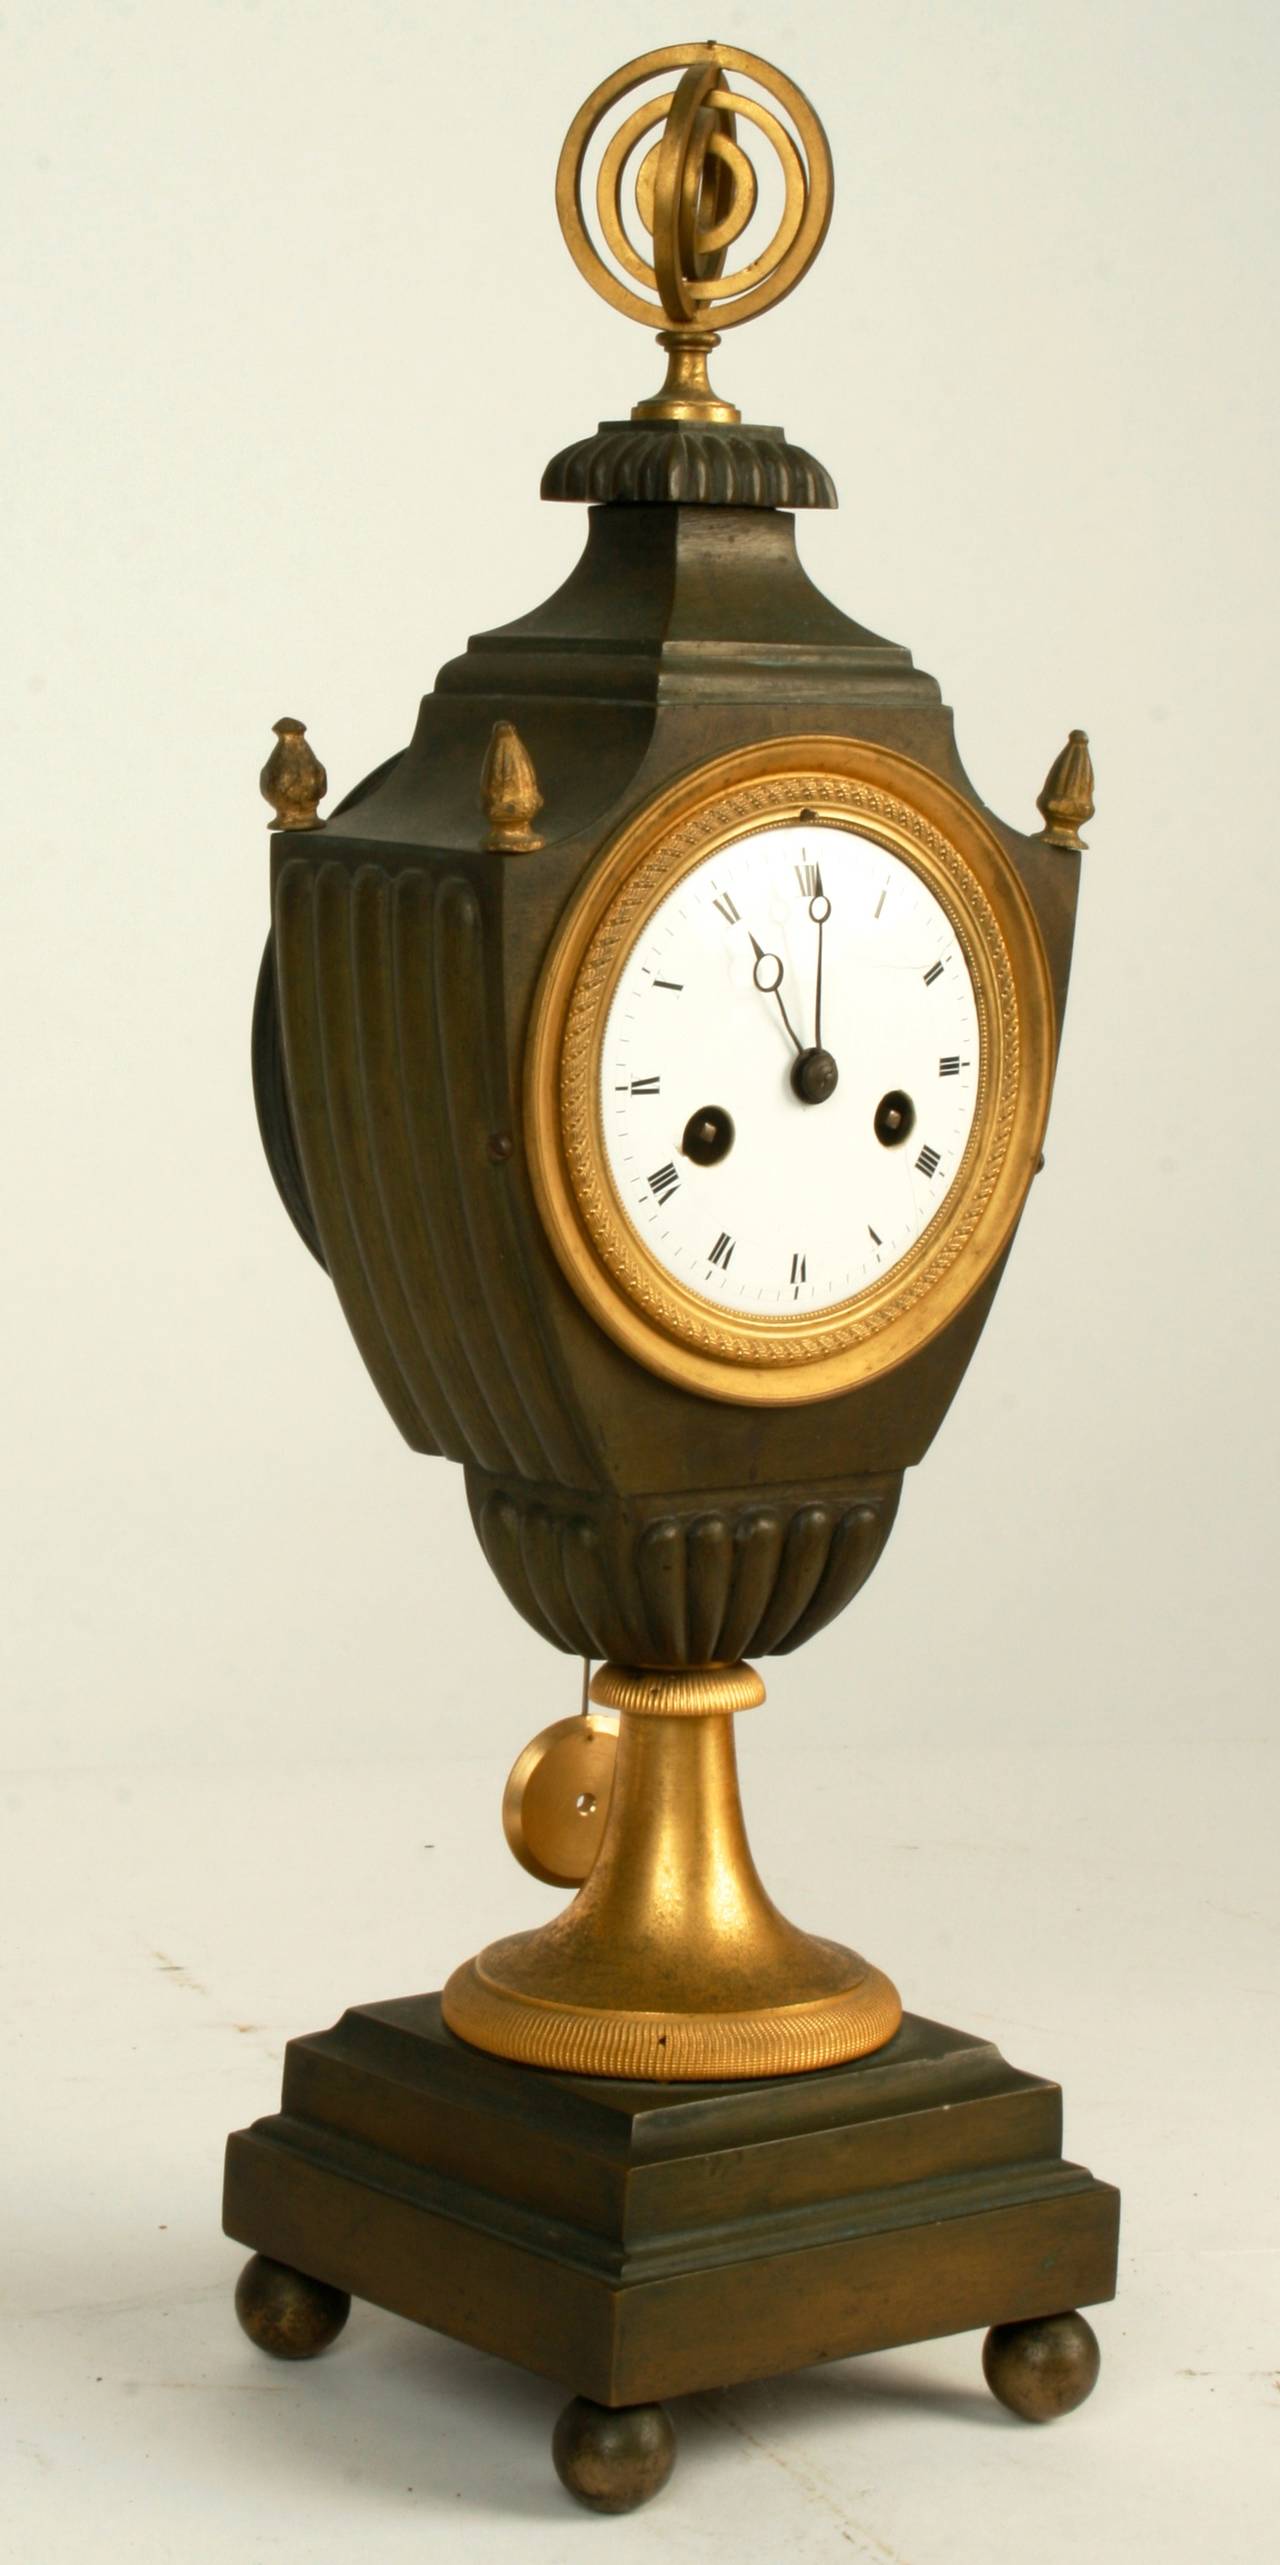 This graceful gilt bronze striking clock is from France’s Directoire period. The clocks white enameled face has black Roman numerals and is framed with a gilt ring in the classical wrapped ribbon design which is typical of the Directoire period